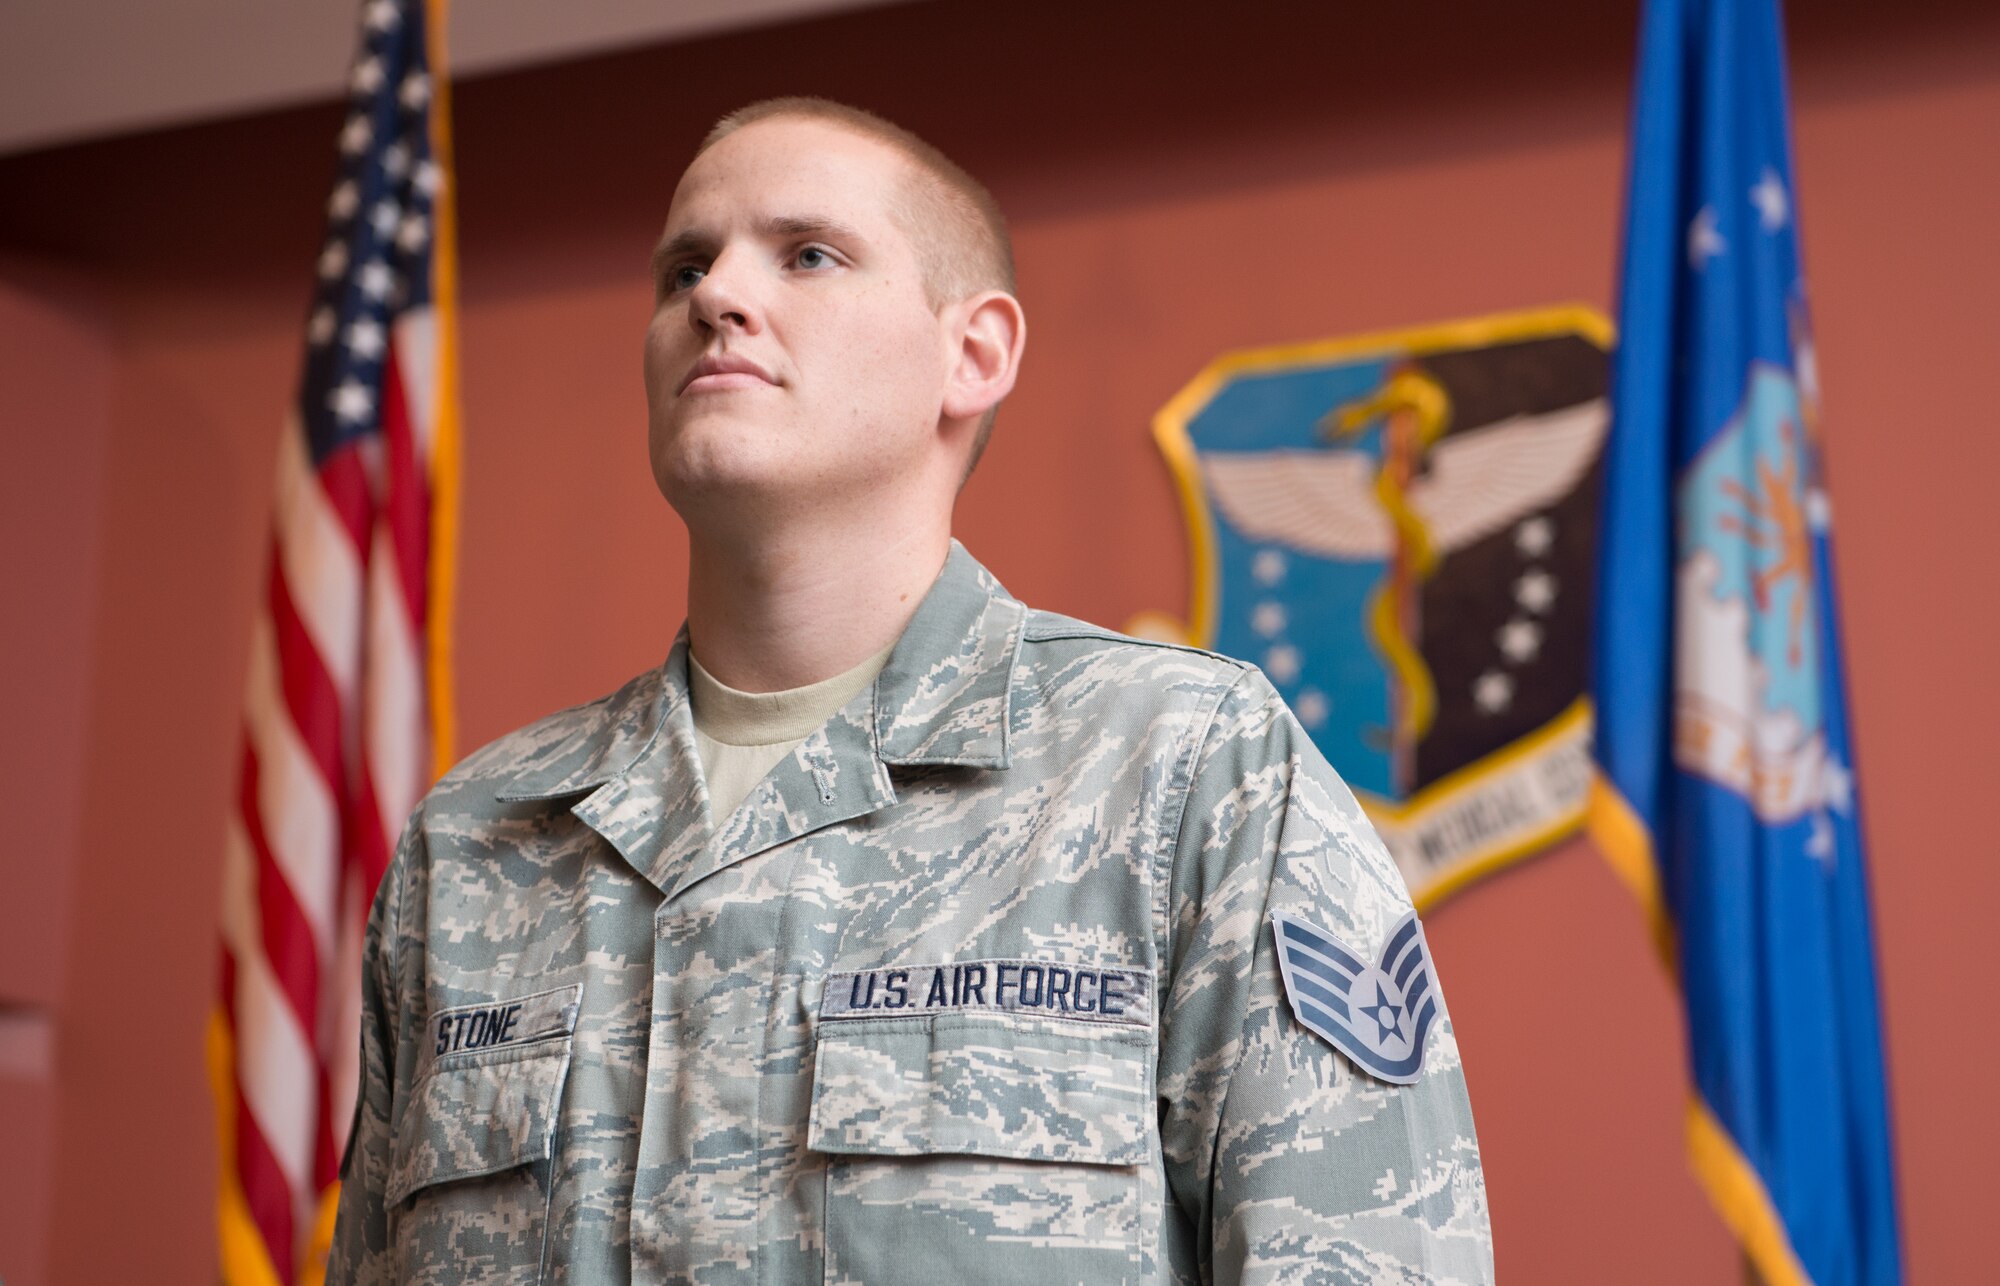 Staff Sgt. Spencer Stone, a 60th Medical Operations Squadron medical technician, listens as the responsibilities of noncommissioned offers are read during a promotion ceremony at Travis Air Force Base, Calif., Oct. 30, 2015. Stone was promoted to the rank of staff sergeant effective, Nov. 1, by order of Air Force Chief of Staff Gen. Mark A. Welsh III. Stone was promoted to staff sergeant for the leadership and courage he showed in August when he and two friends thwarted a potential terrorist attack on a train traveling to Paris. (U.S. Air Force photo/Ken Wright)